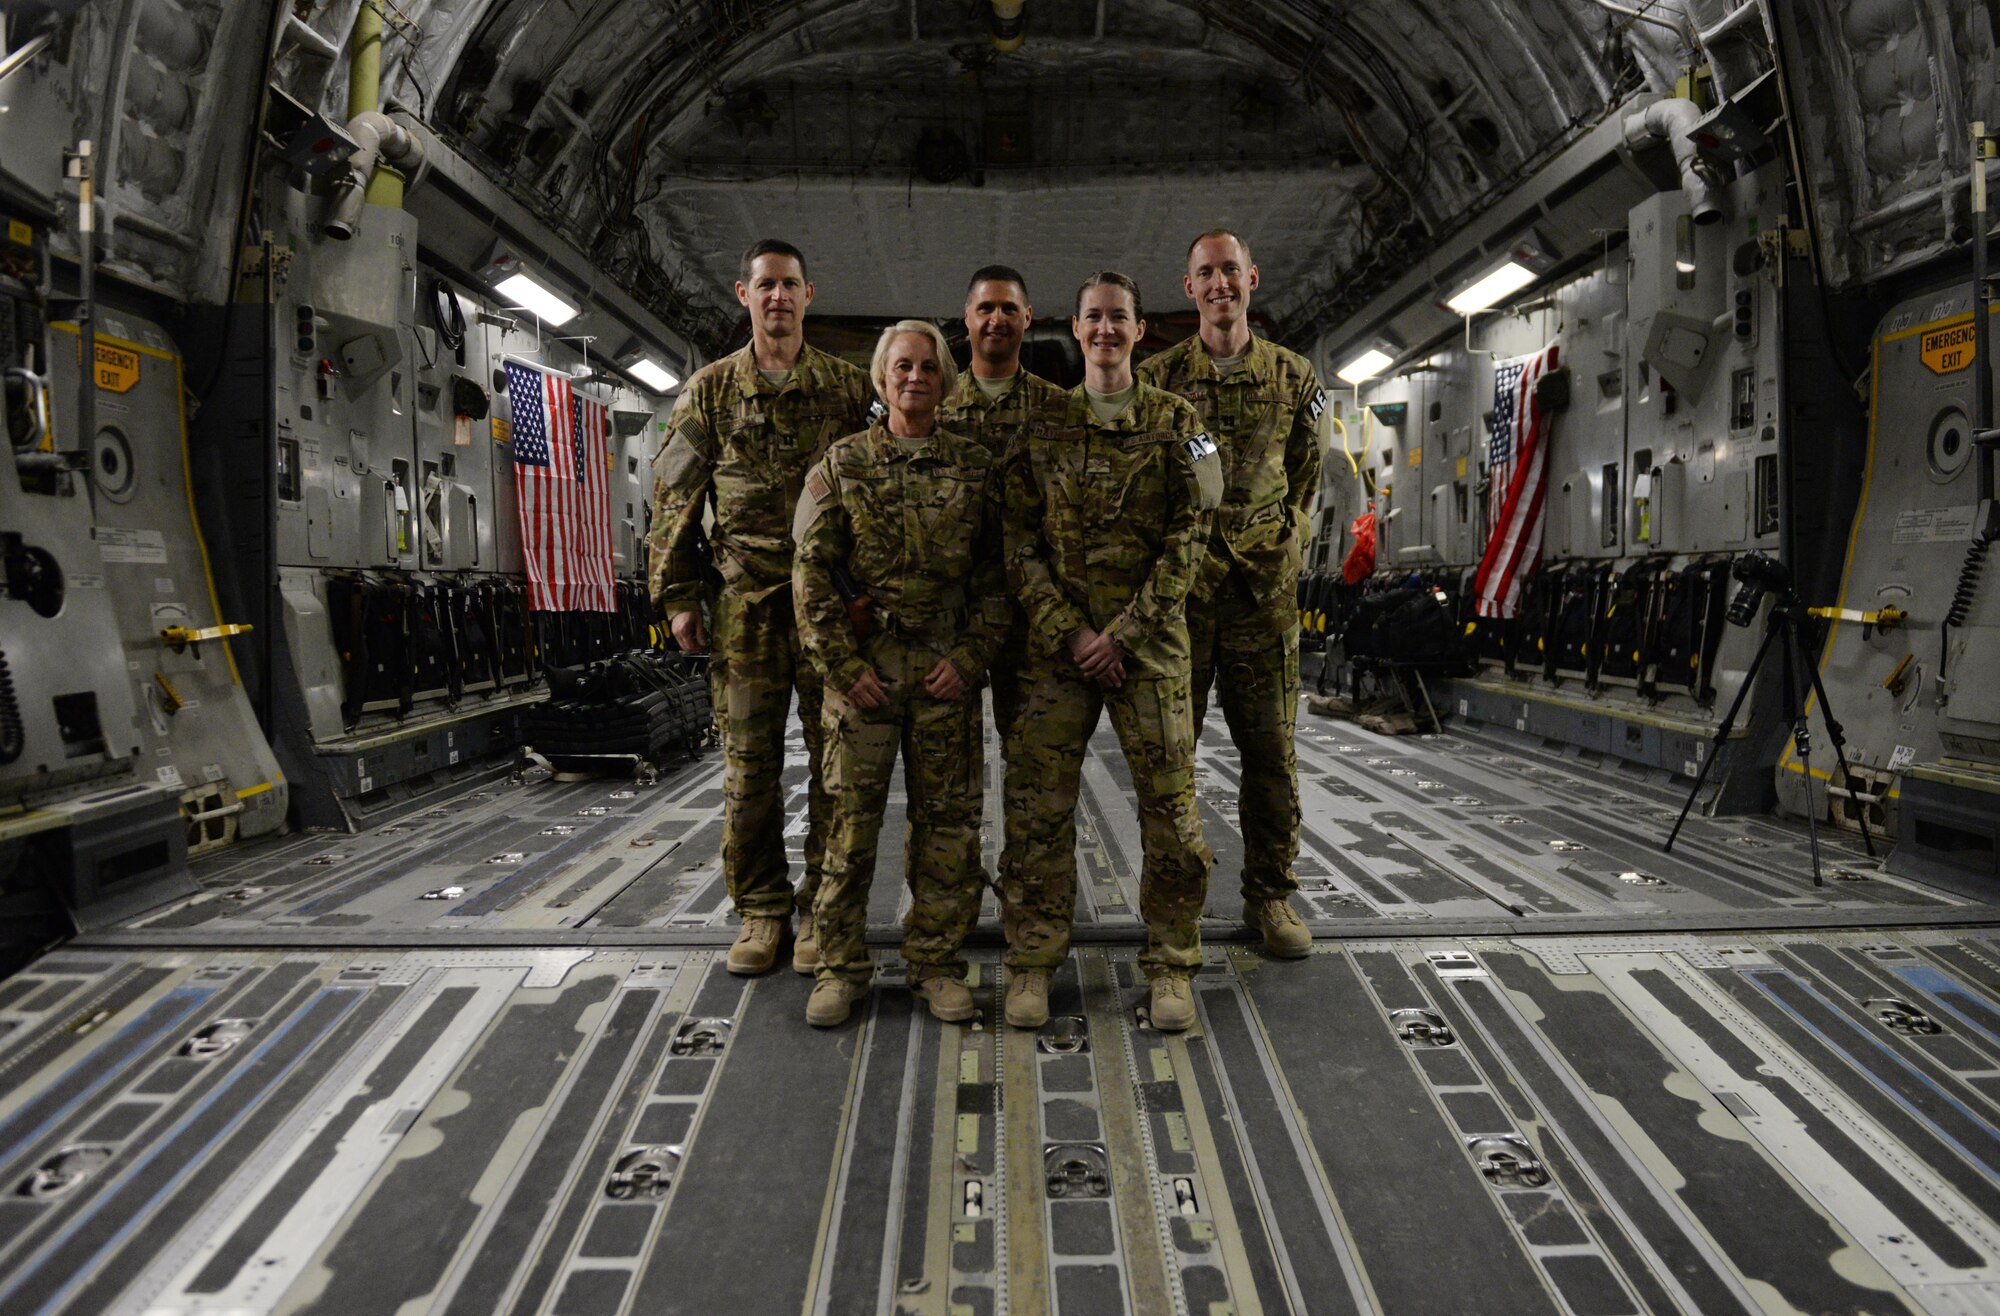 U.S. Airmen assigned to the 455th Expeditionary Aeromedical Evacuation Squadron pose for a photo aboard a C-17 Globemaster III aircraft before receiving patients for an AE mission to Germany at Bagram Airfield, Afghanistan, Aug. 9, 2015.  The 455th EAES Airmen are charged with the responsibility of evacuating the sick and wounded from Central Command to higher echelons of medical care. (U.S. Air Force photo by Maj. Tony Wickman/Released)